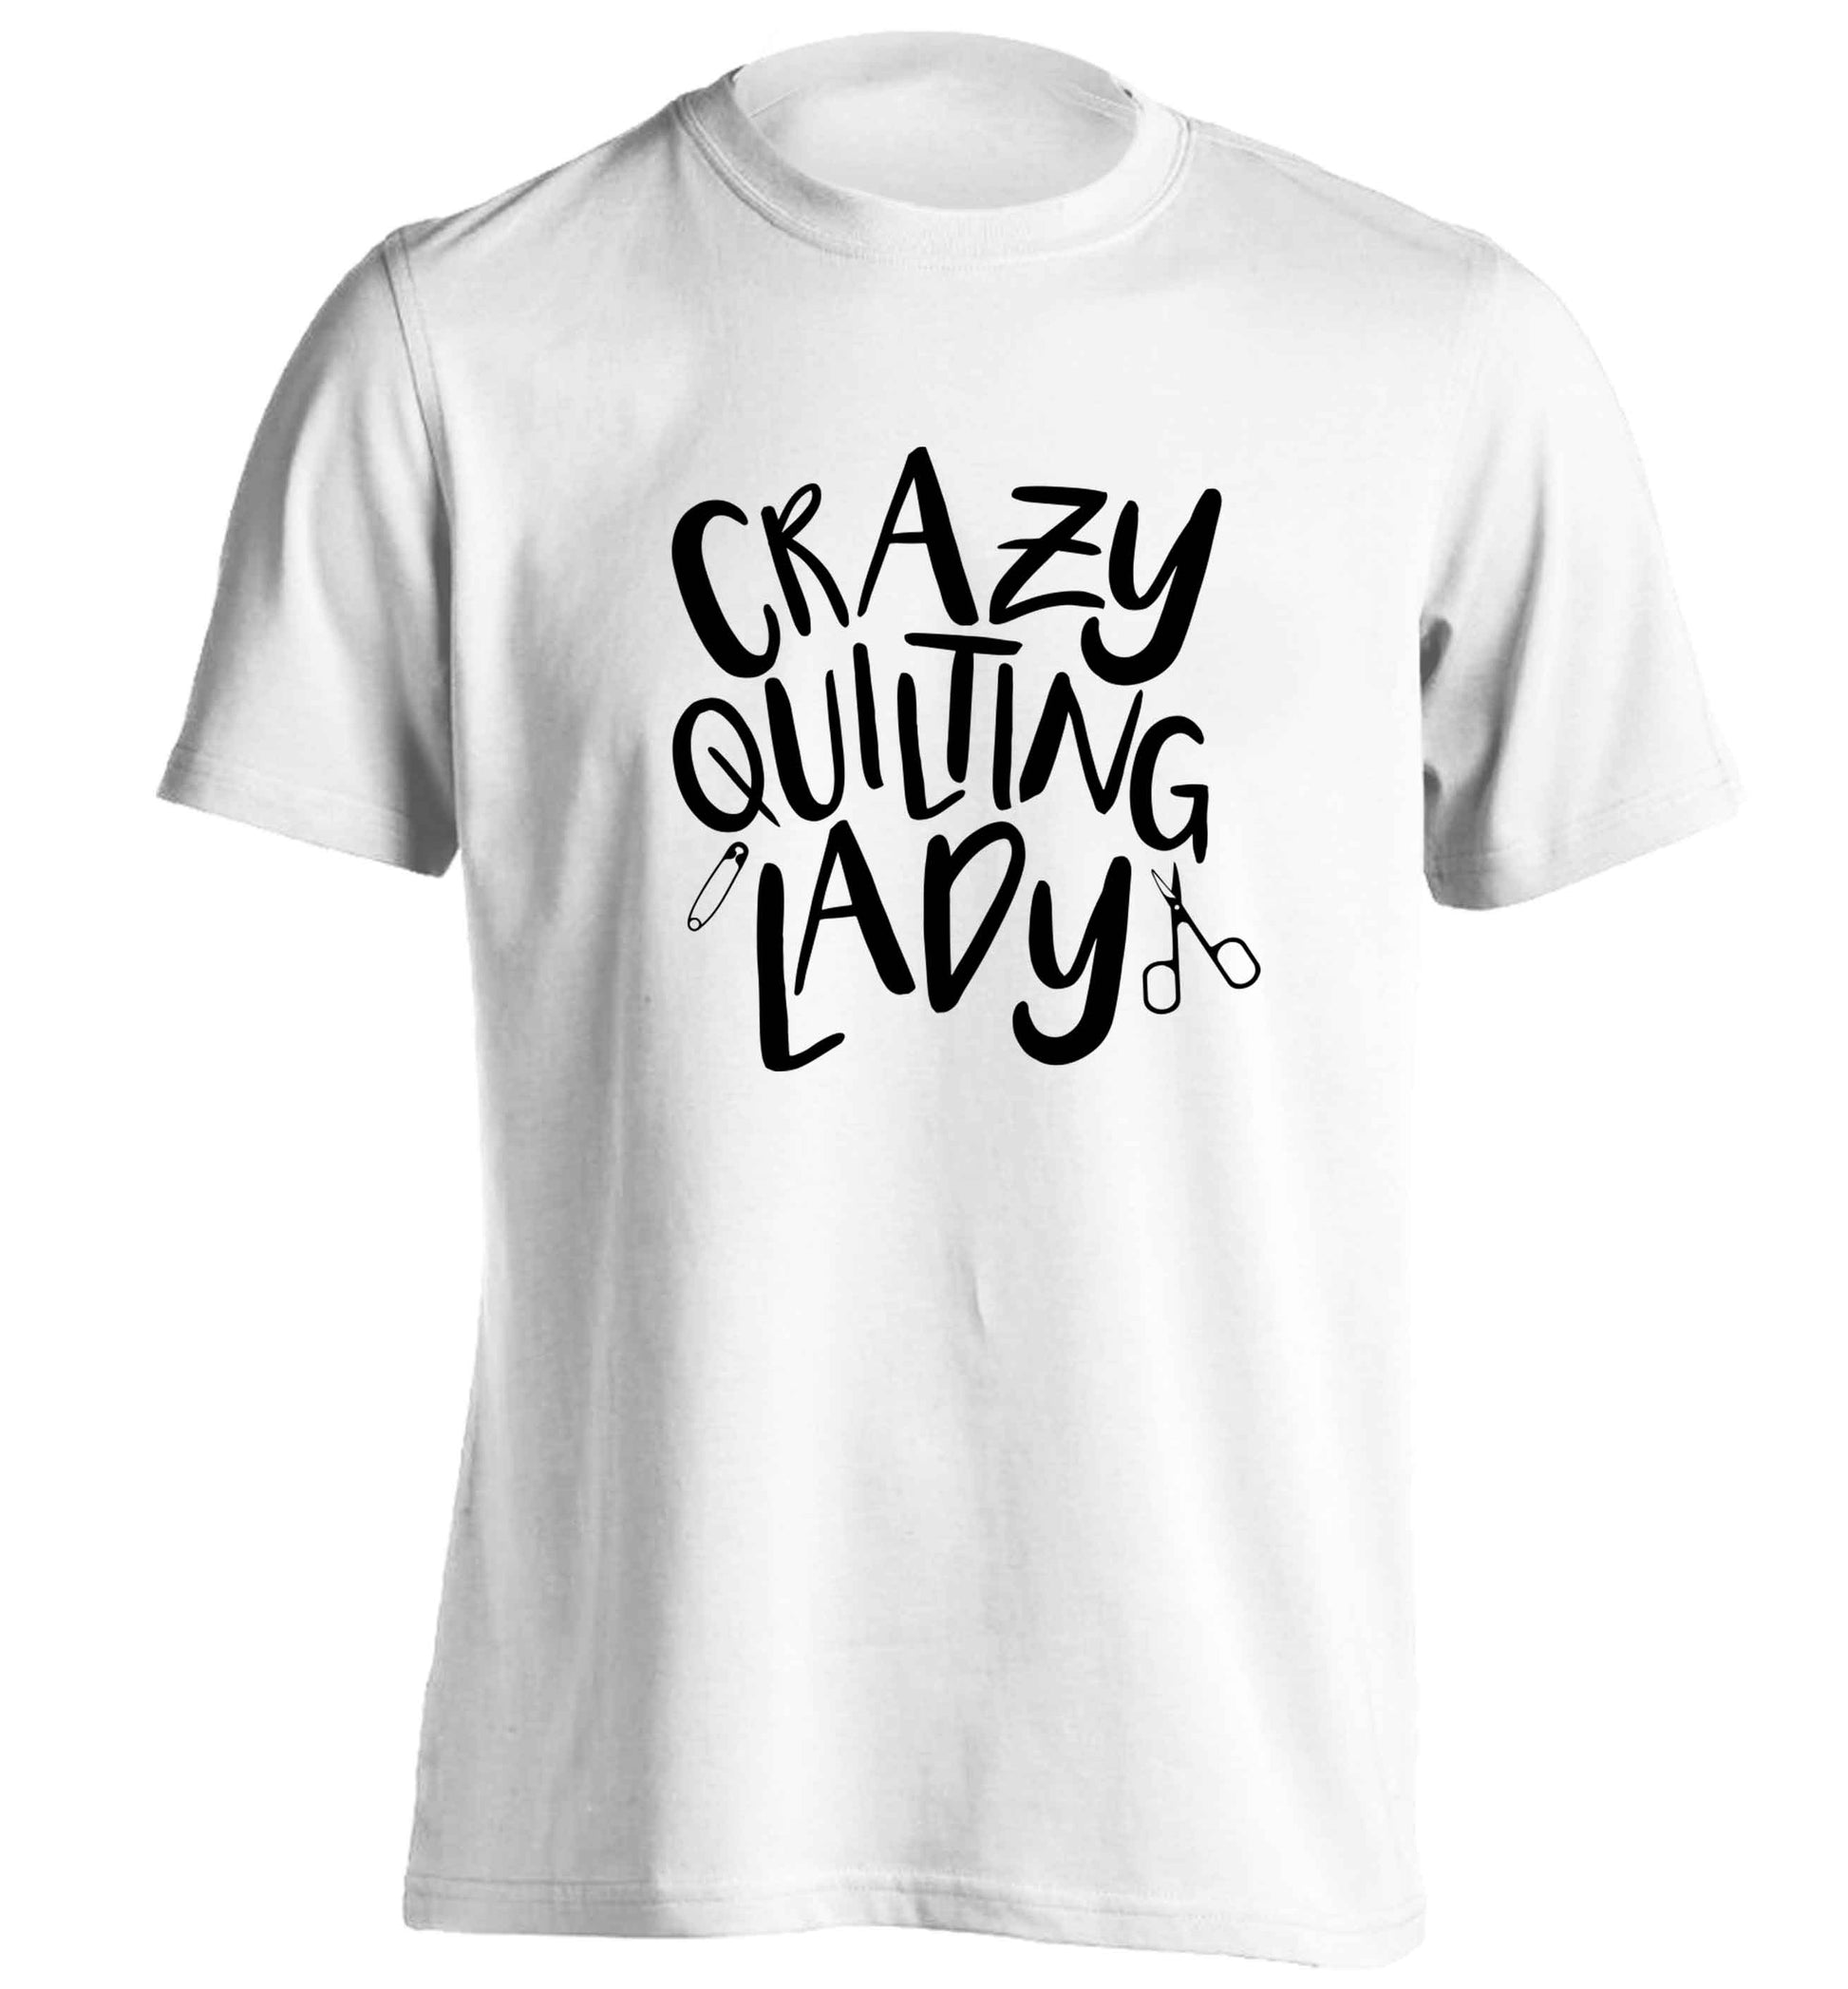 Crazy quilting lady adults unisex white Tshirt 2XL